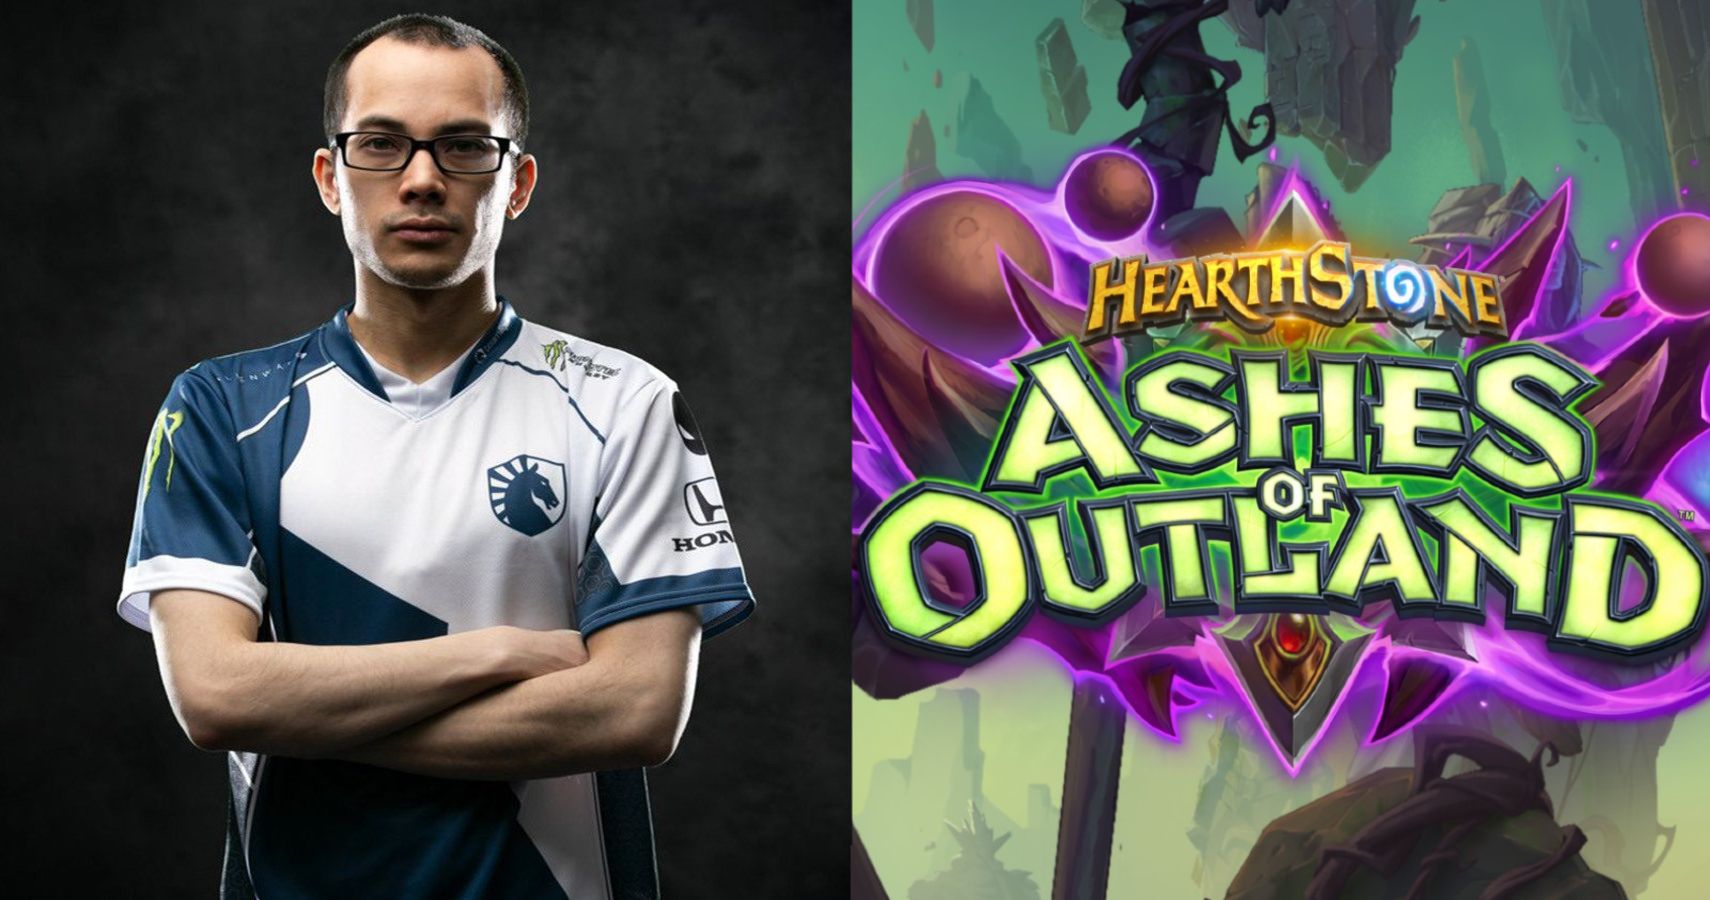 Pro Hearthstone Player Maxime Pelletier Lays Out Exactly How The Game Has Worsened Over Time